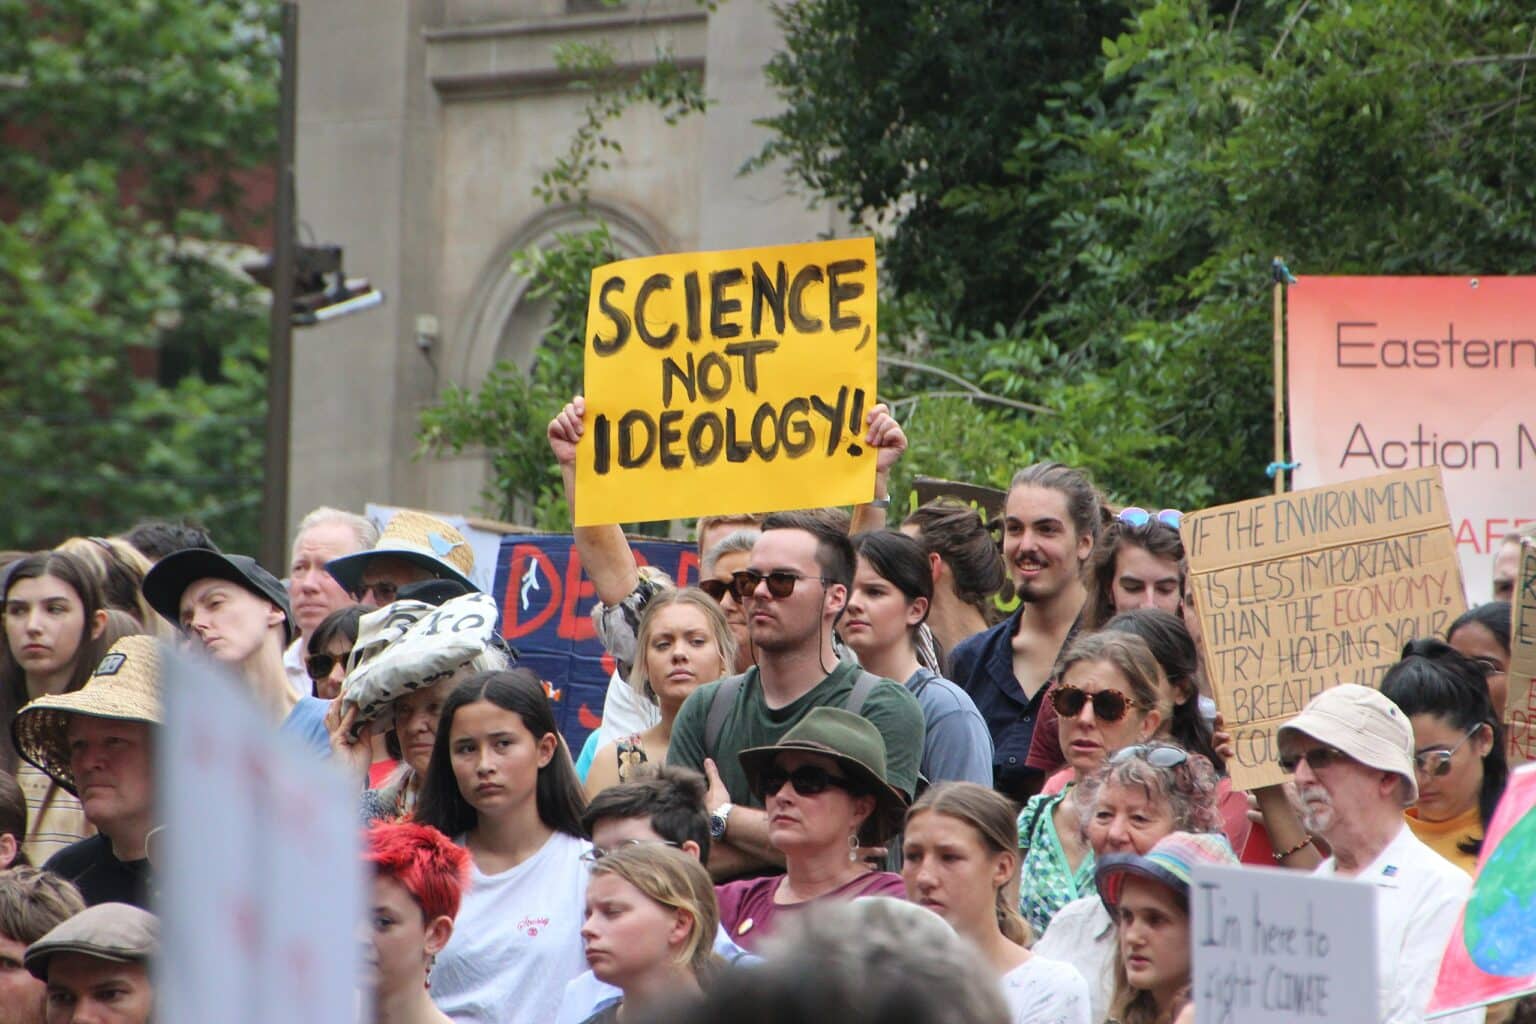 Crowd of people protesting and holding signs, including a bright yellow poster with black text 'Science not ideology'